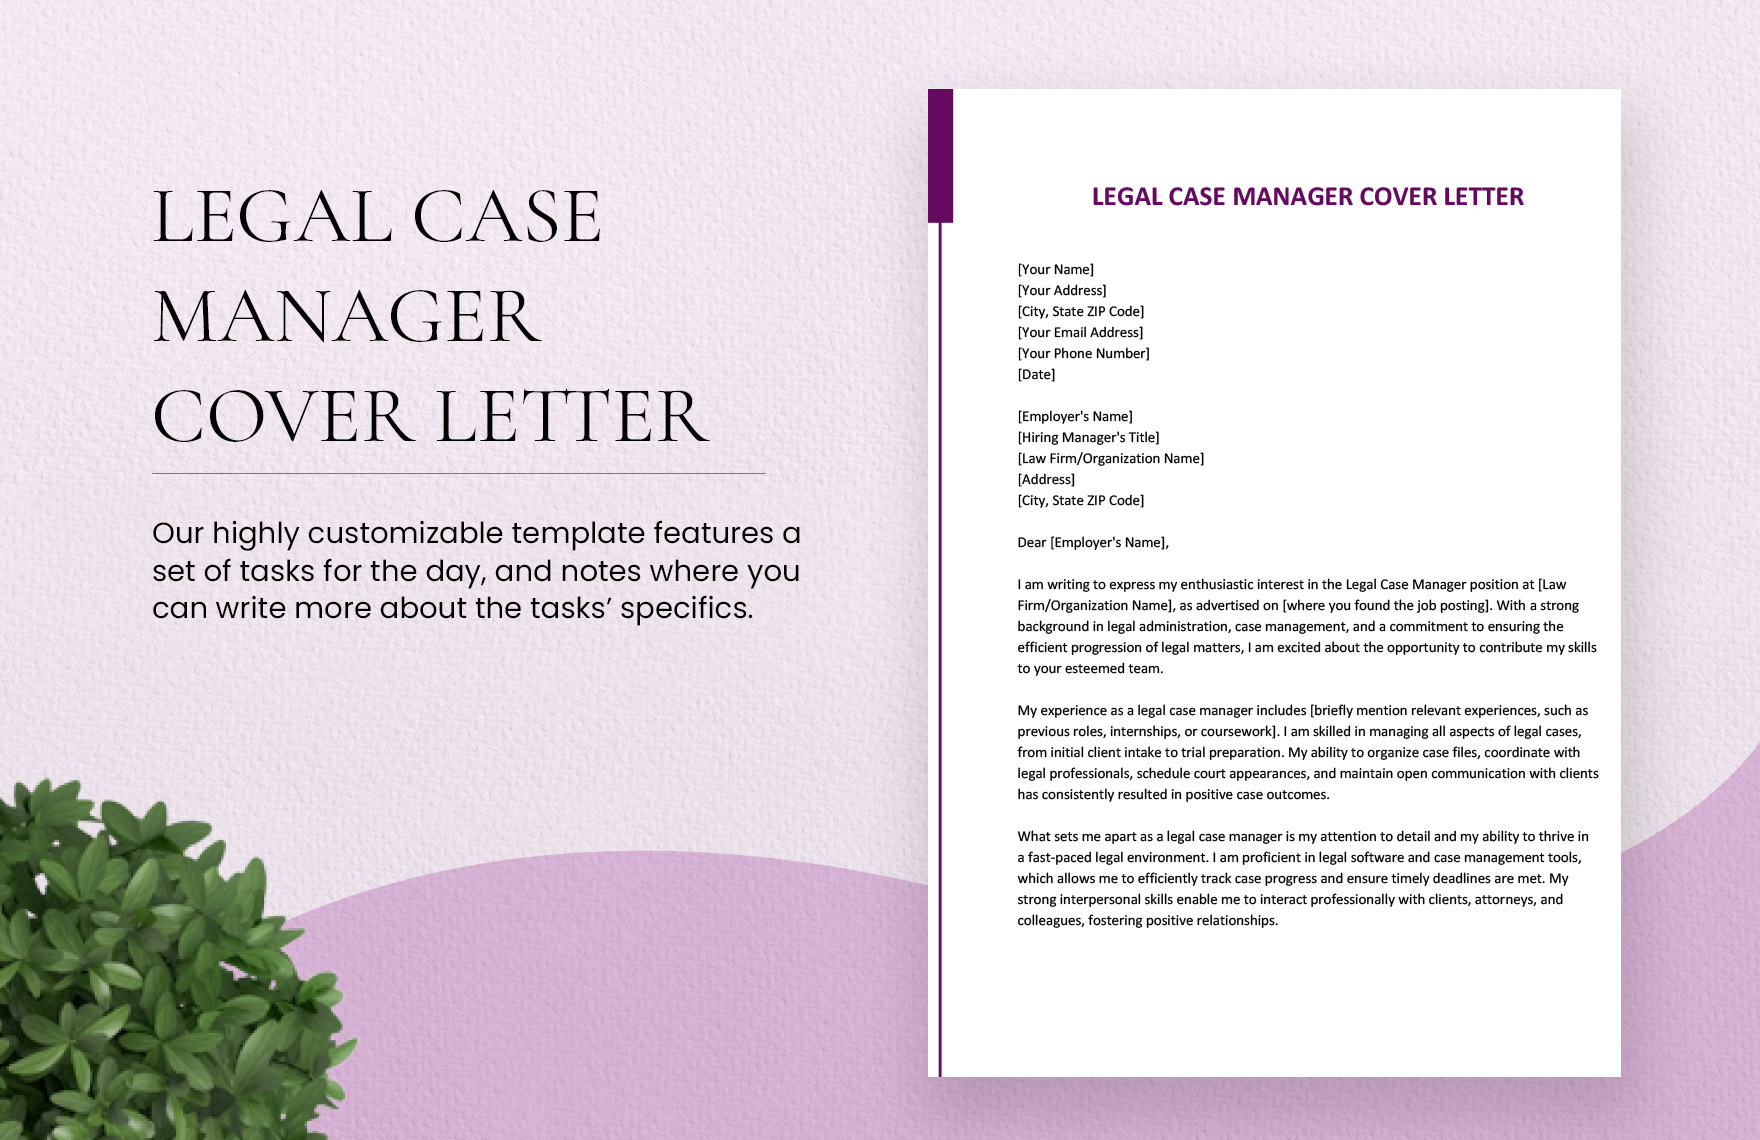 Legal Case Manager Cover Letter in Word, Google Docs